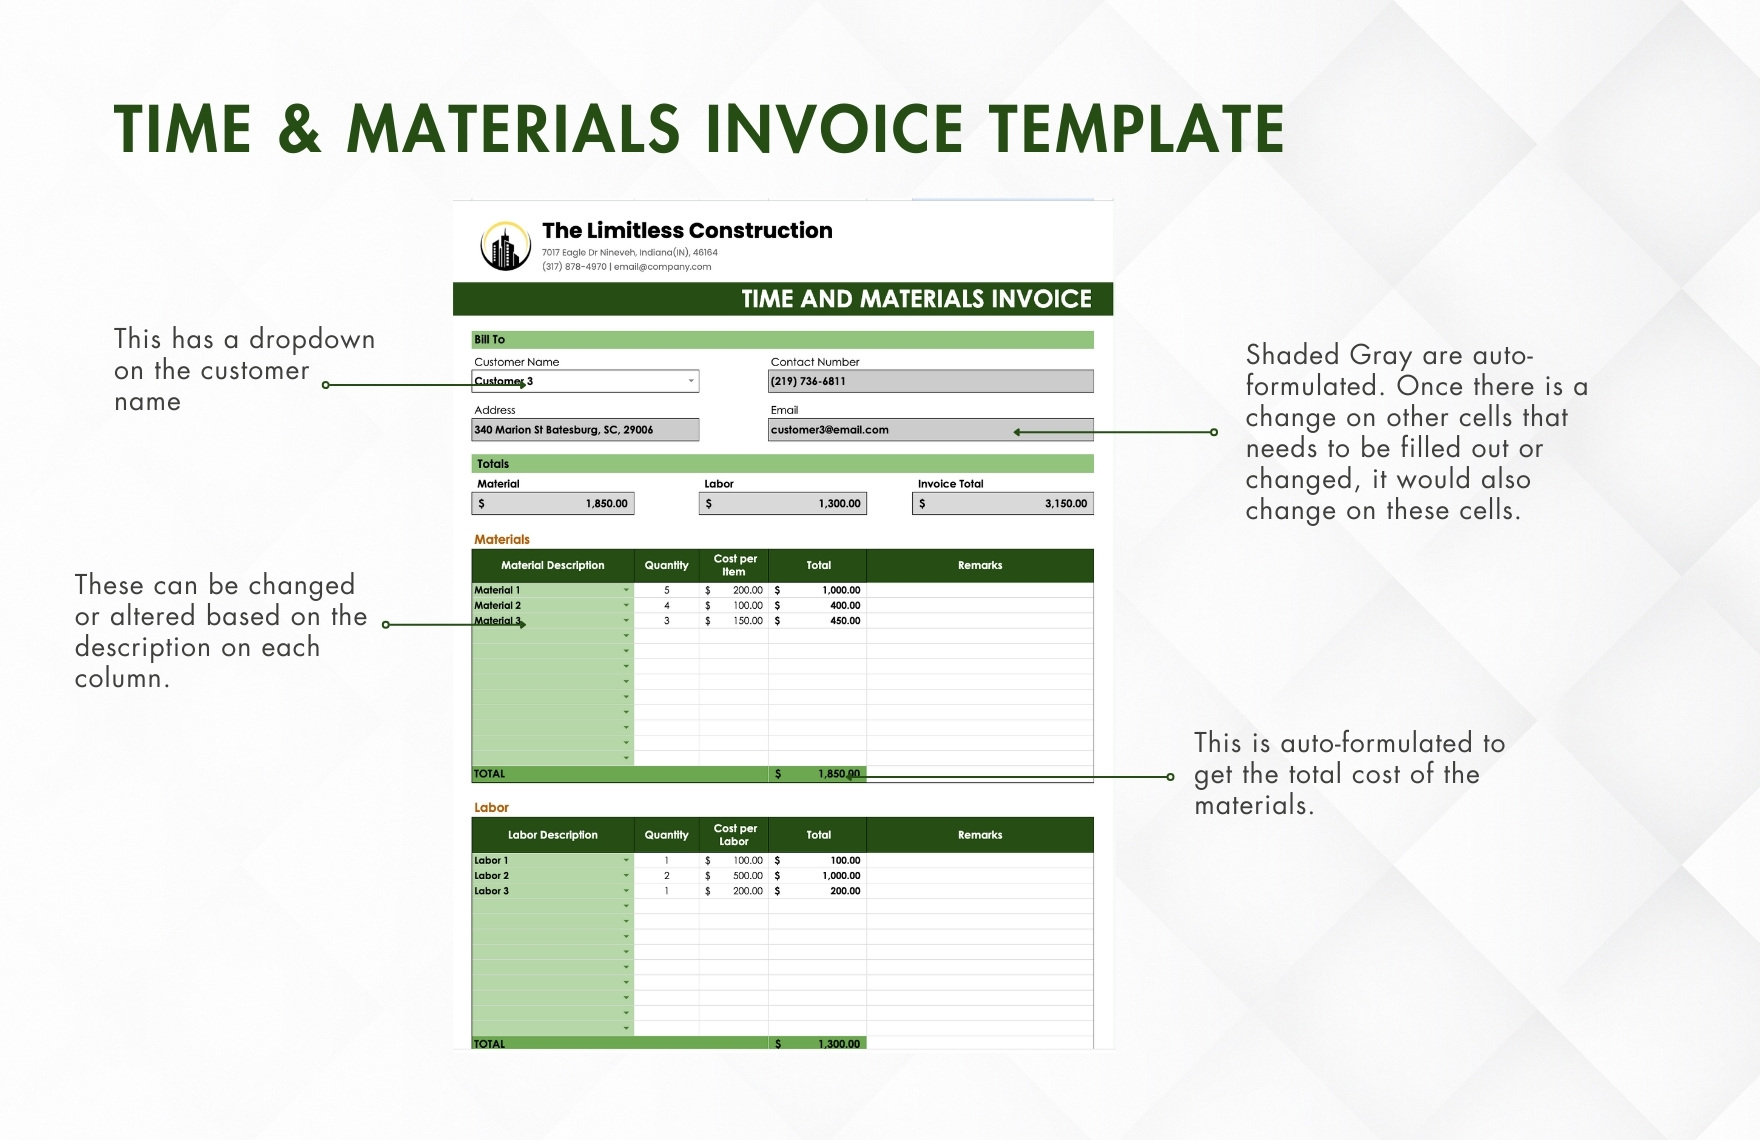 Time & Materials Invoice Template